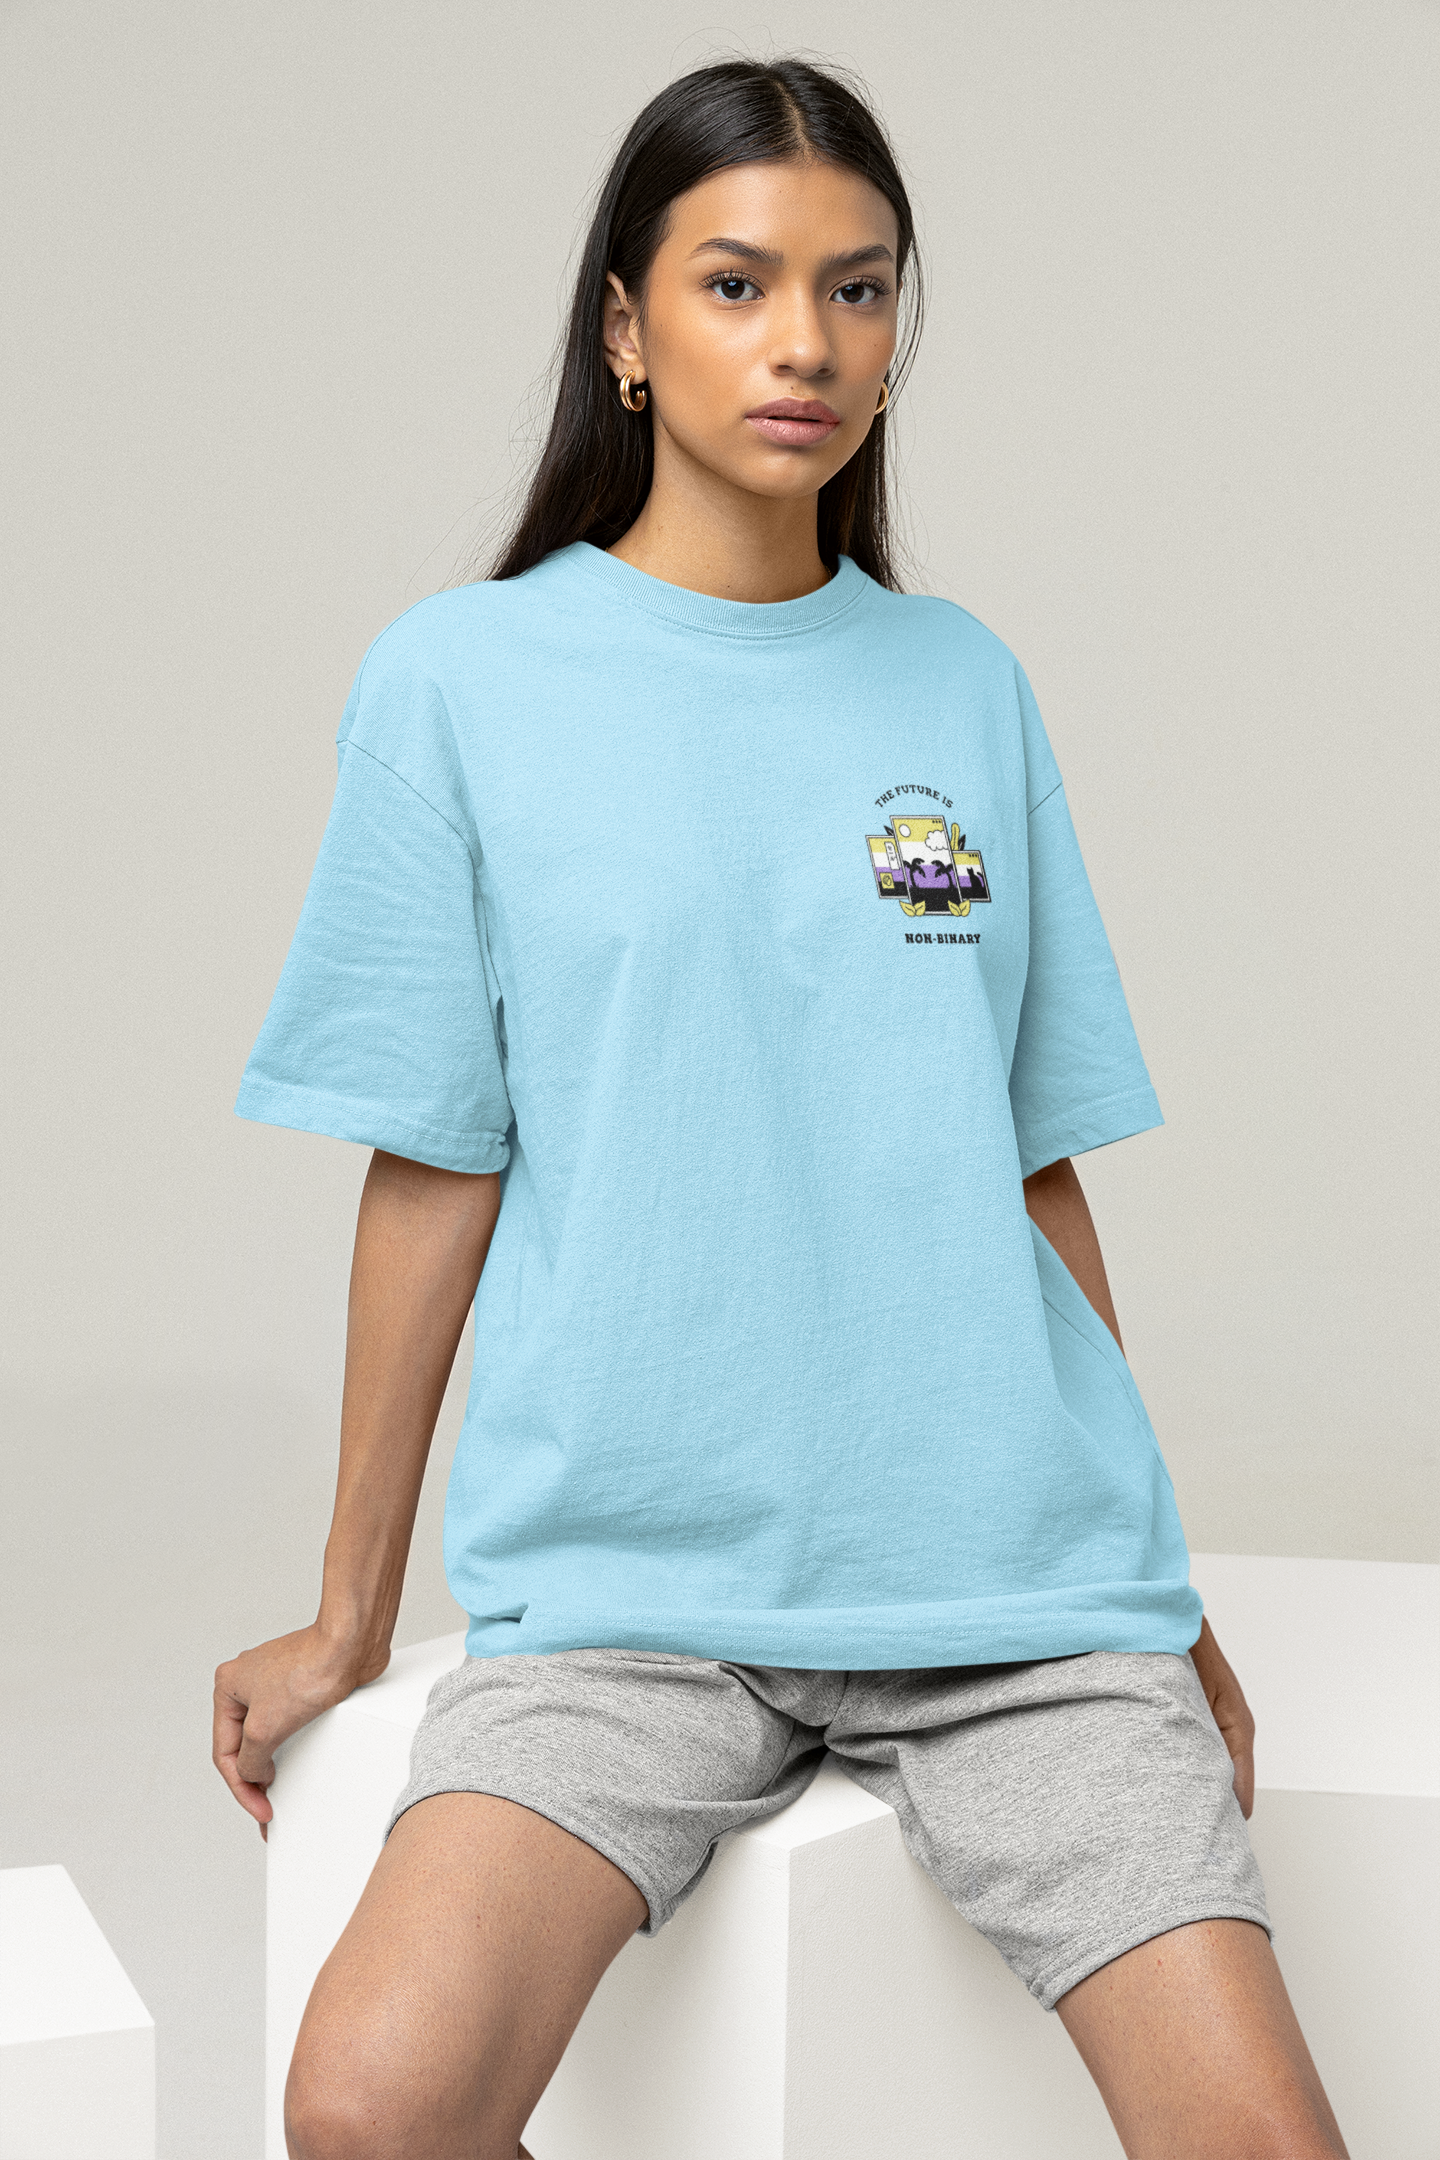 OVERSIZED TSHIRTS BABY BLUE : THE FUTURE IS NON BINARY